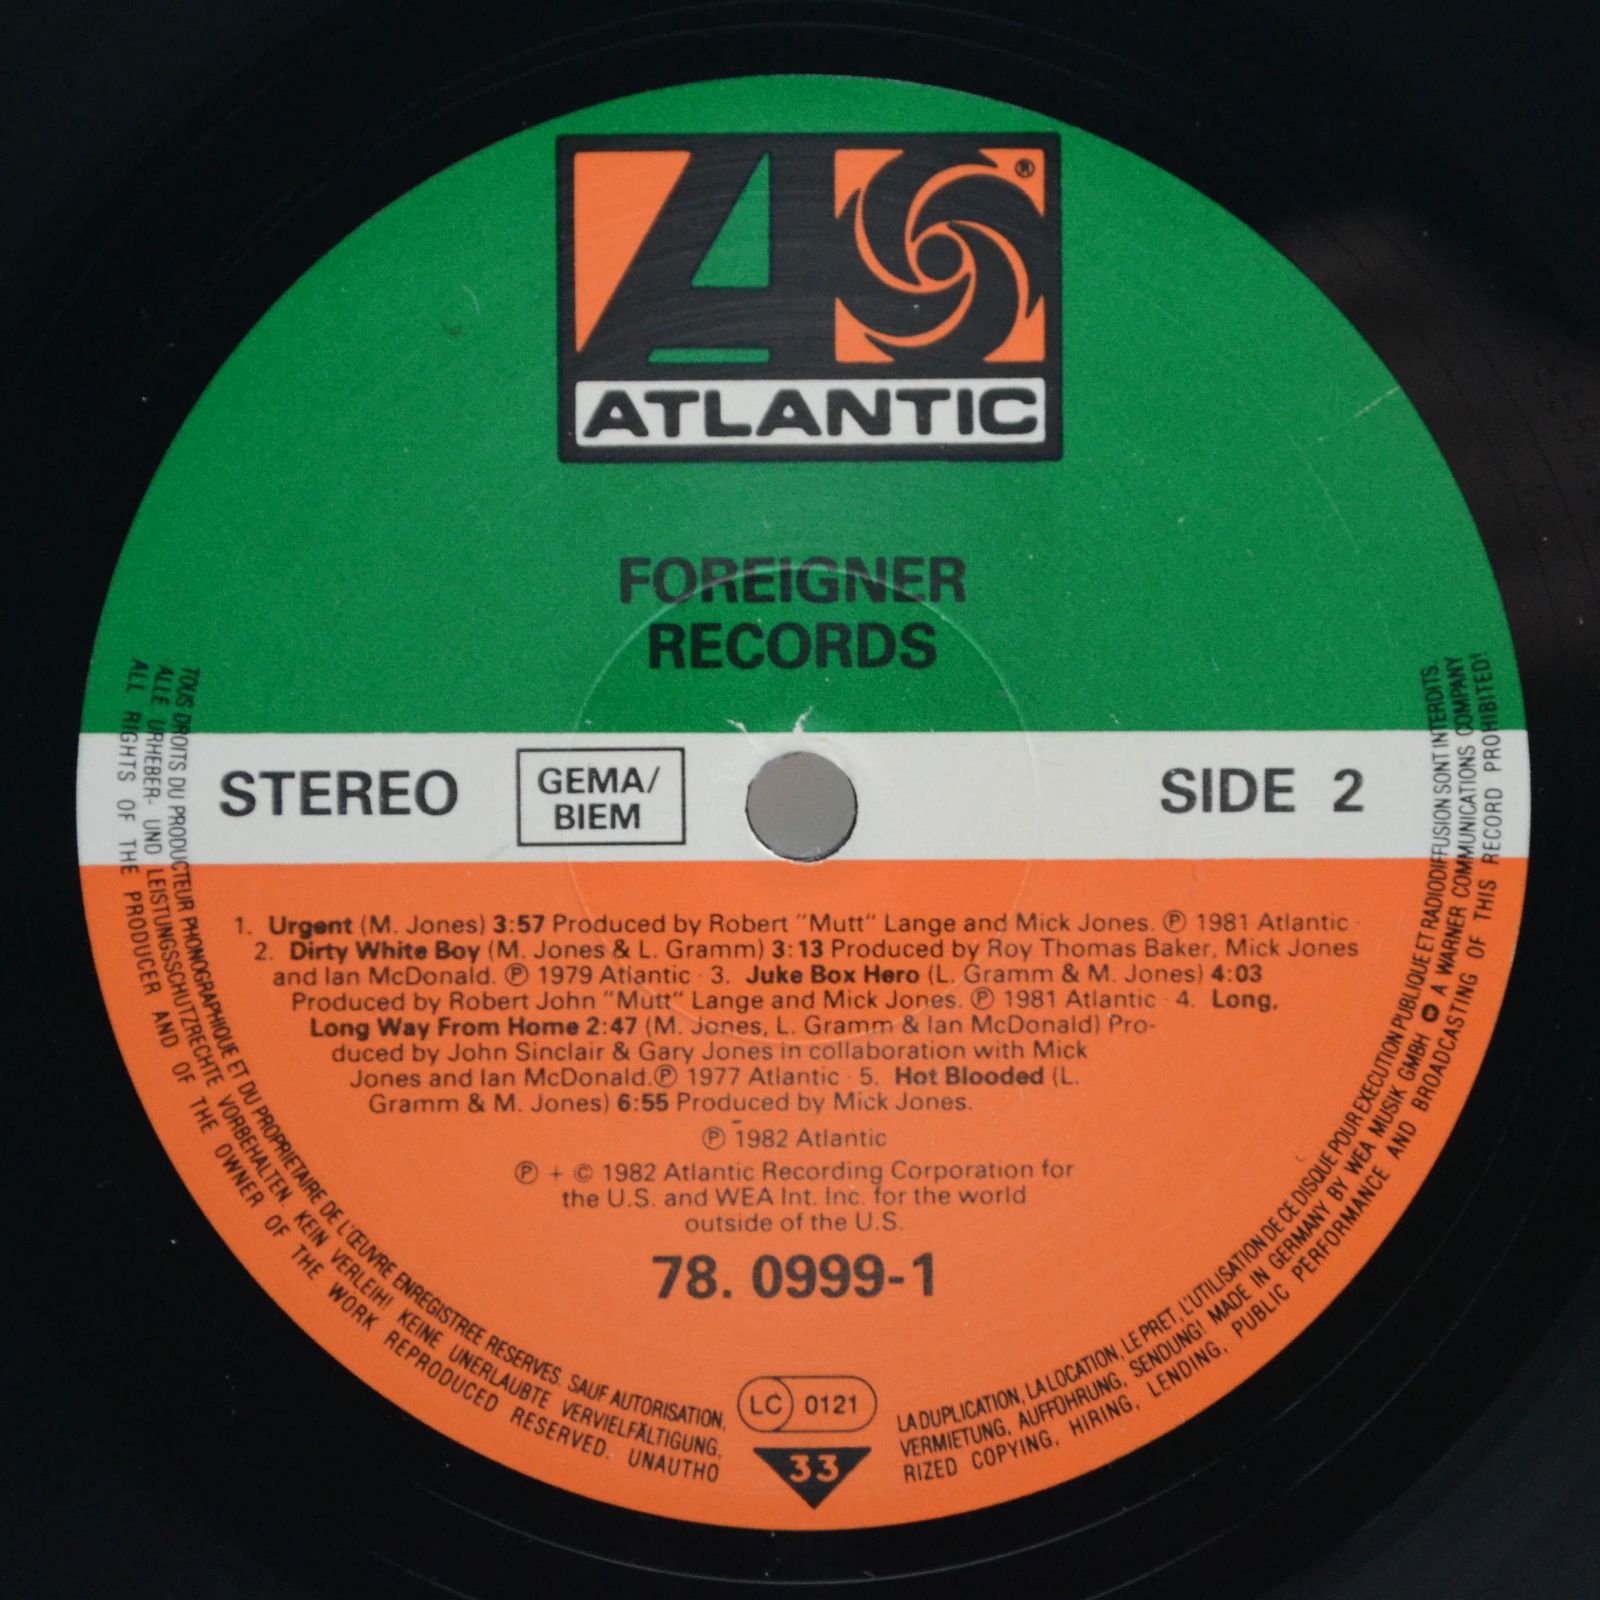 Foreigner — Records, 1982